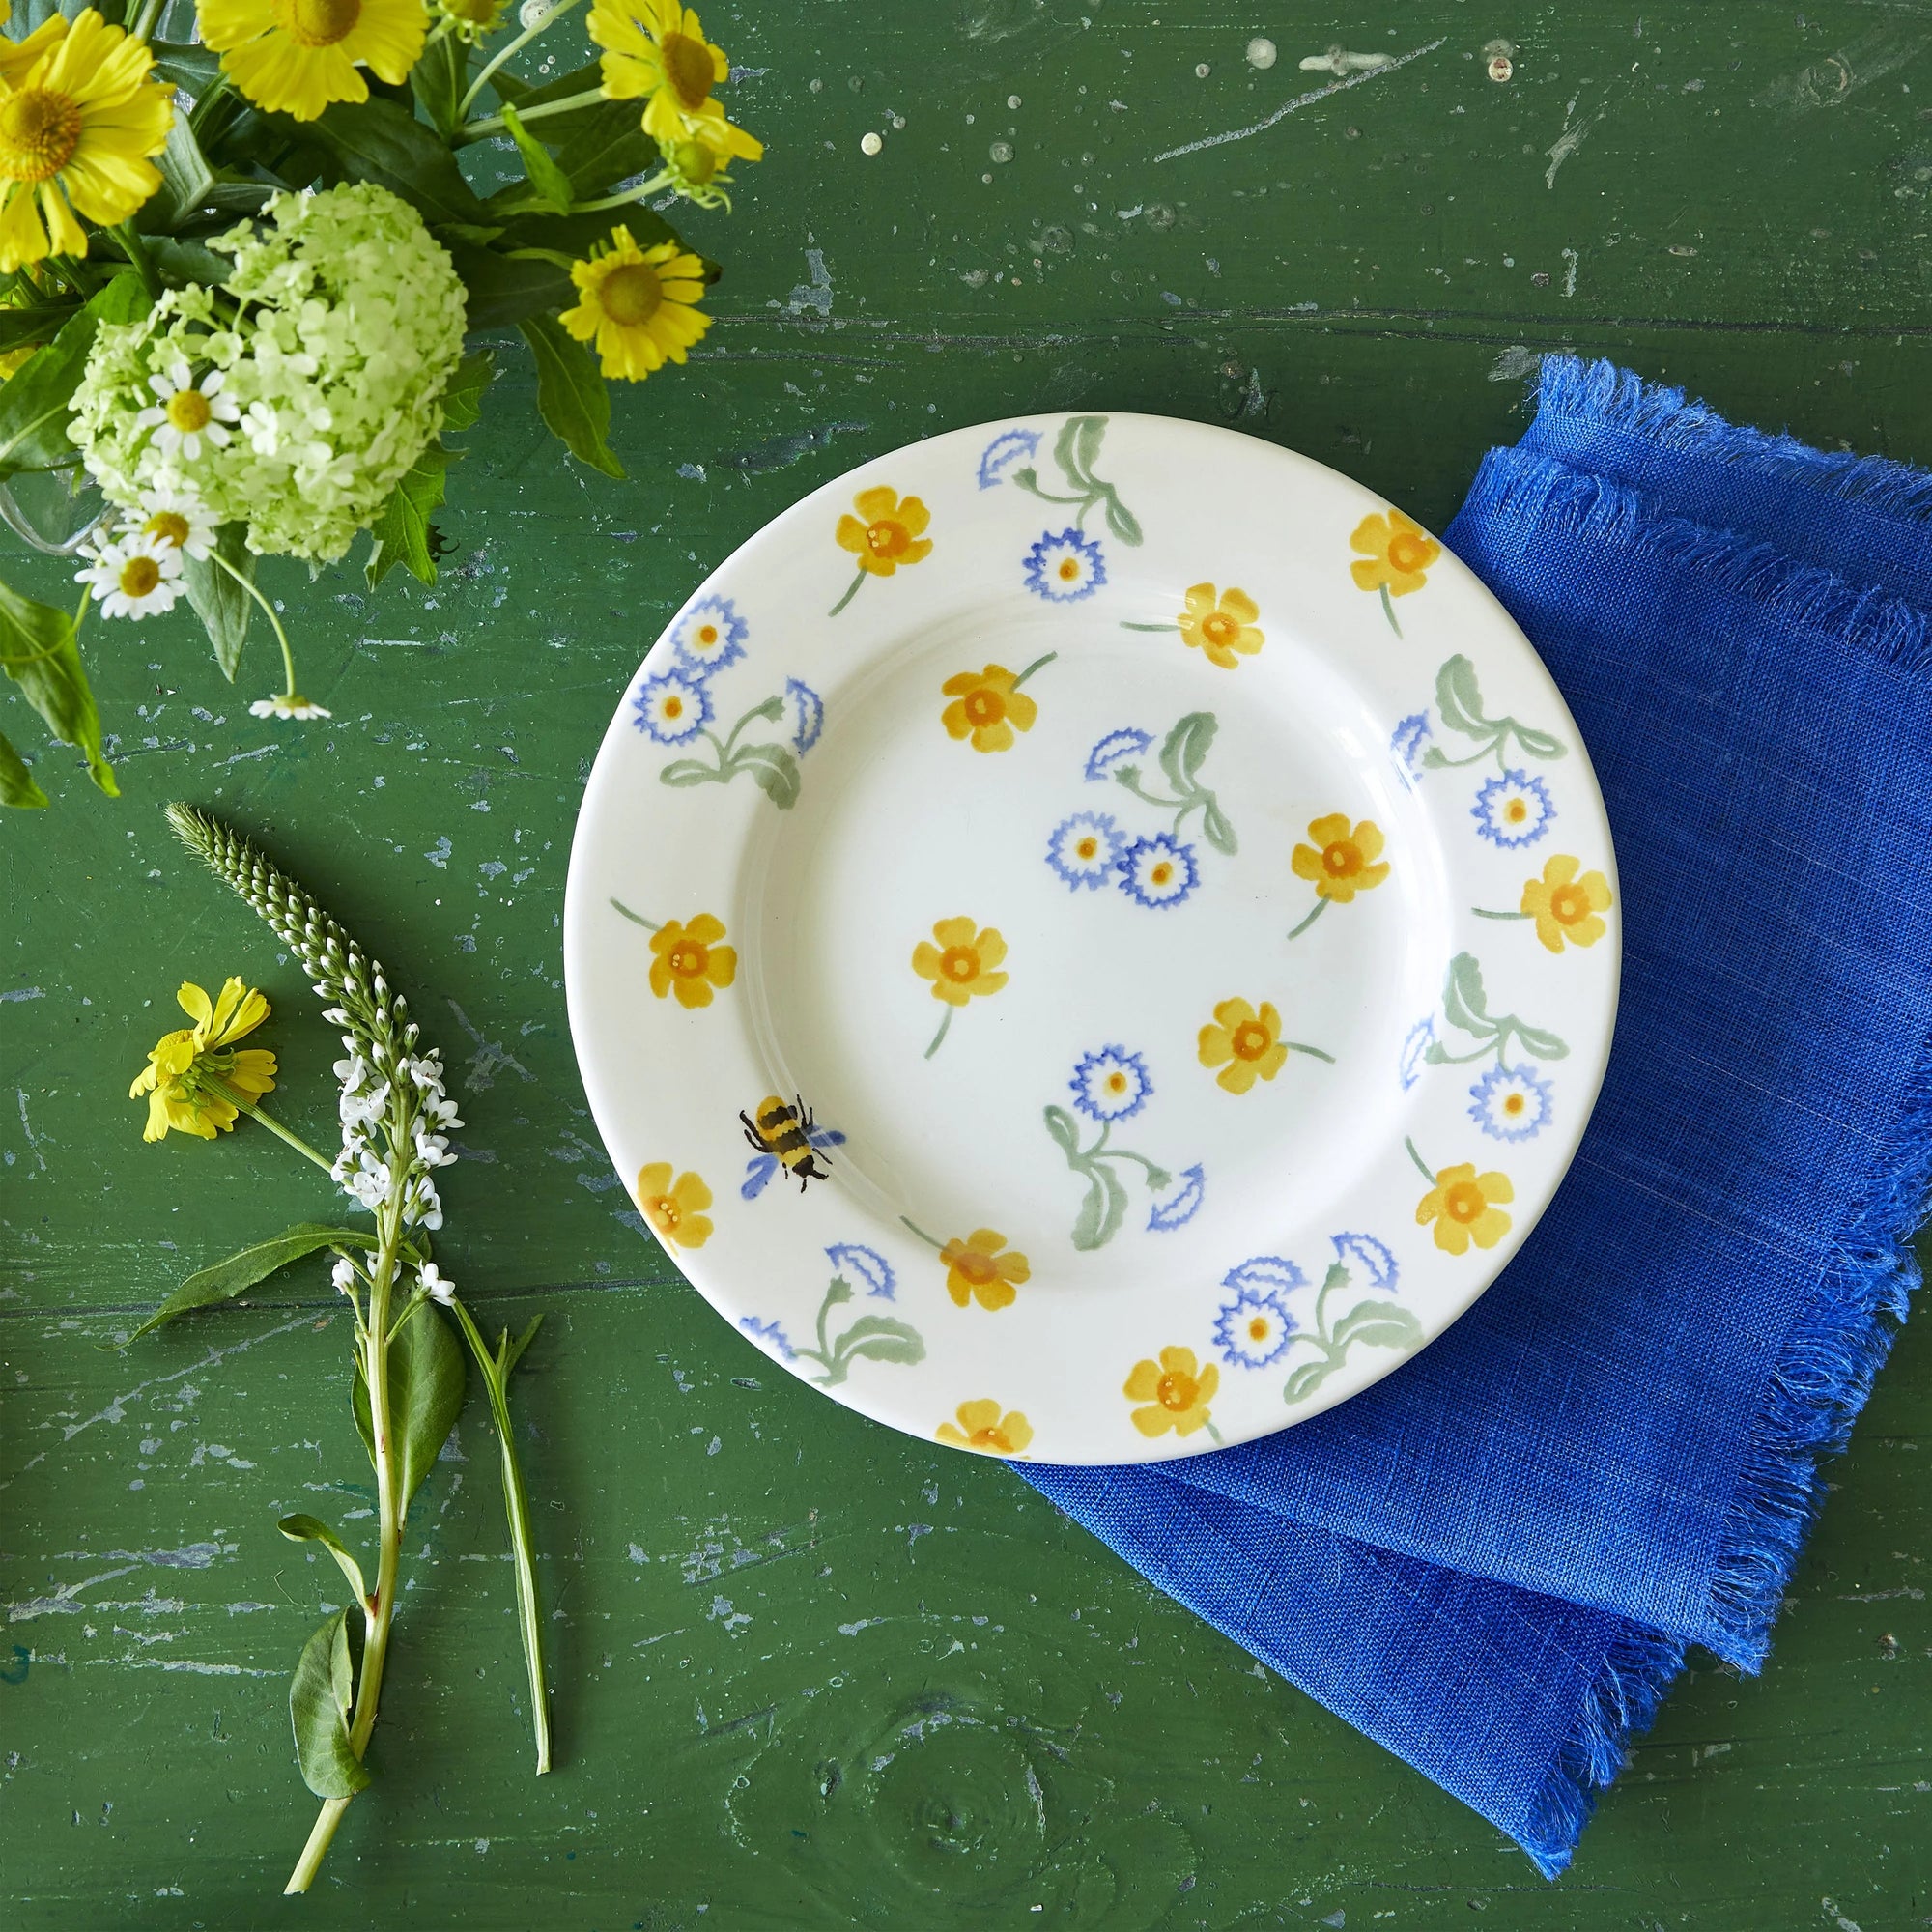 Emma Bridgewater Buttercup and Daisies Plate 8 1/2"